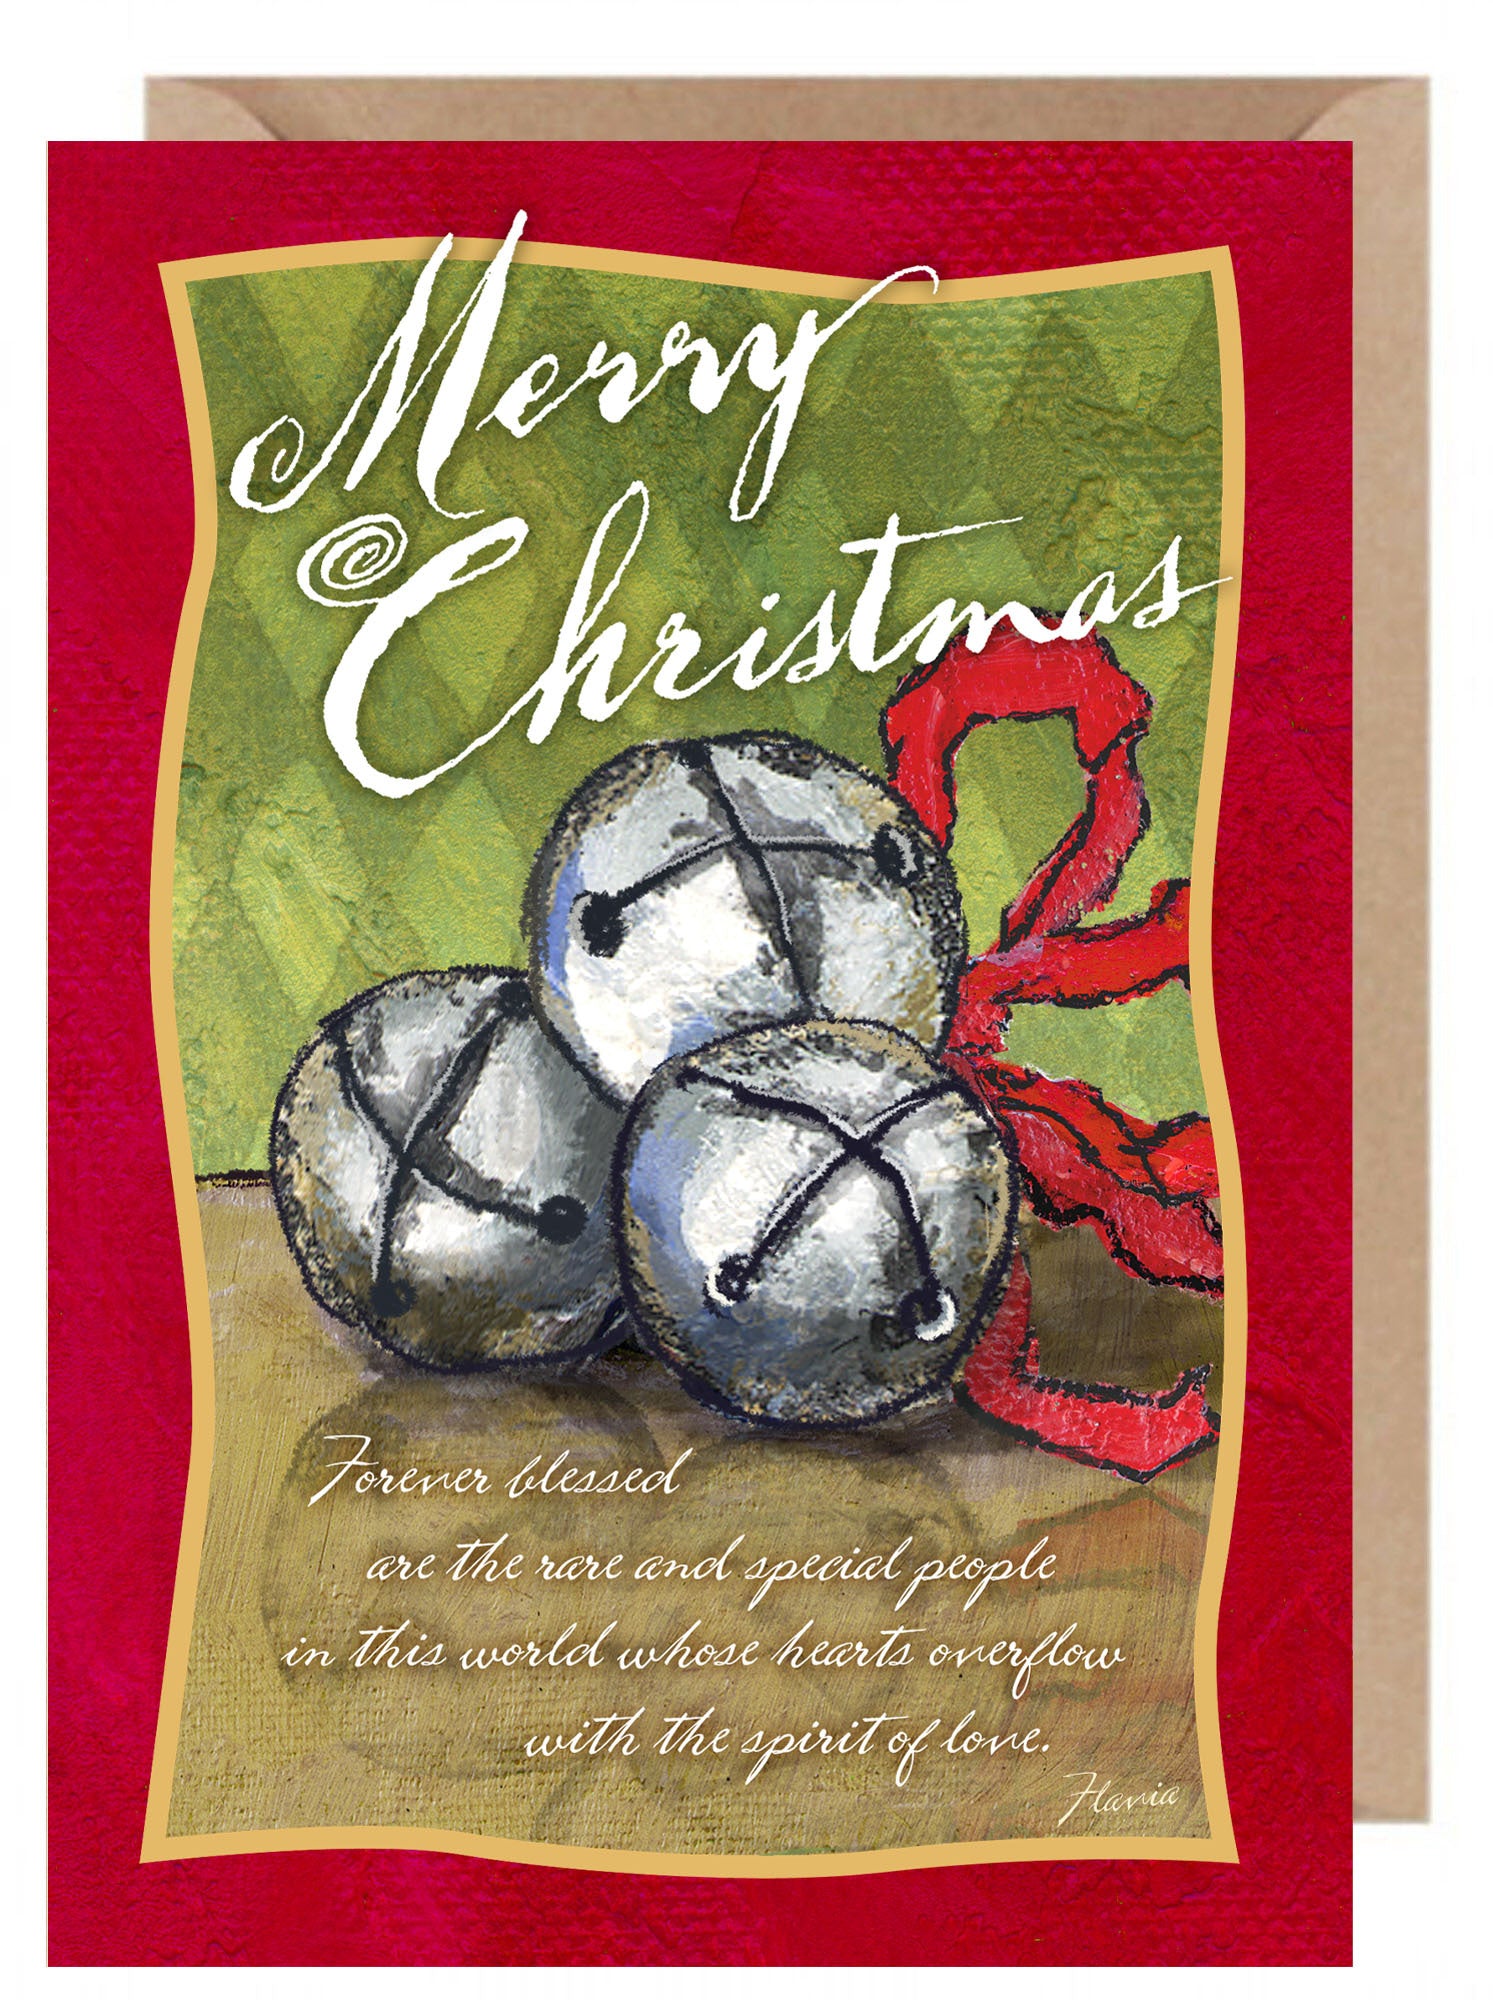 Merry Christmas - a Flavia Weedn inspirational greeting card 0003-6858